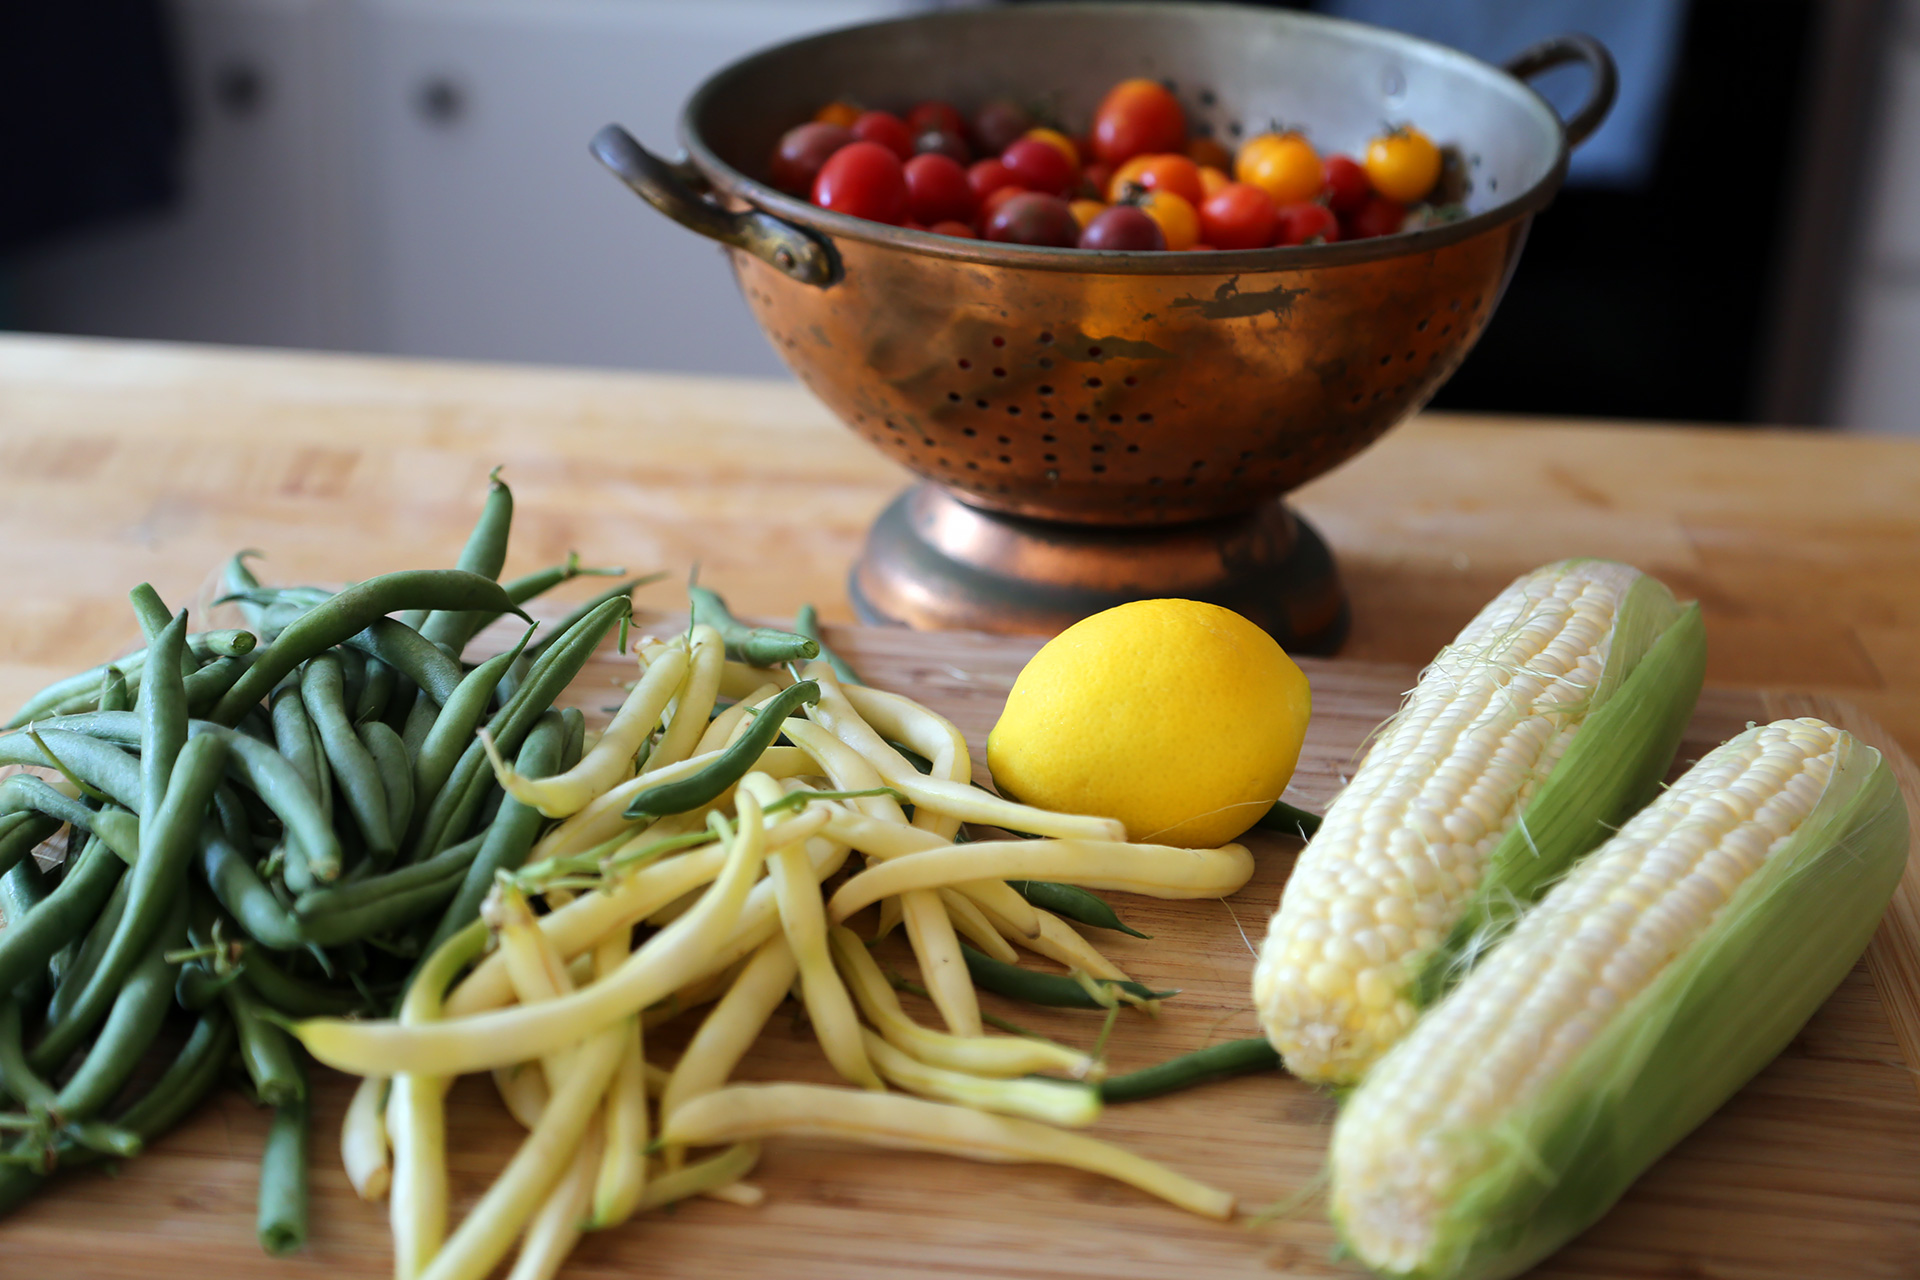 Ingredients for Corn, Green Bean, and Cherry Tomato Sauté